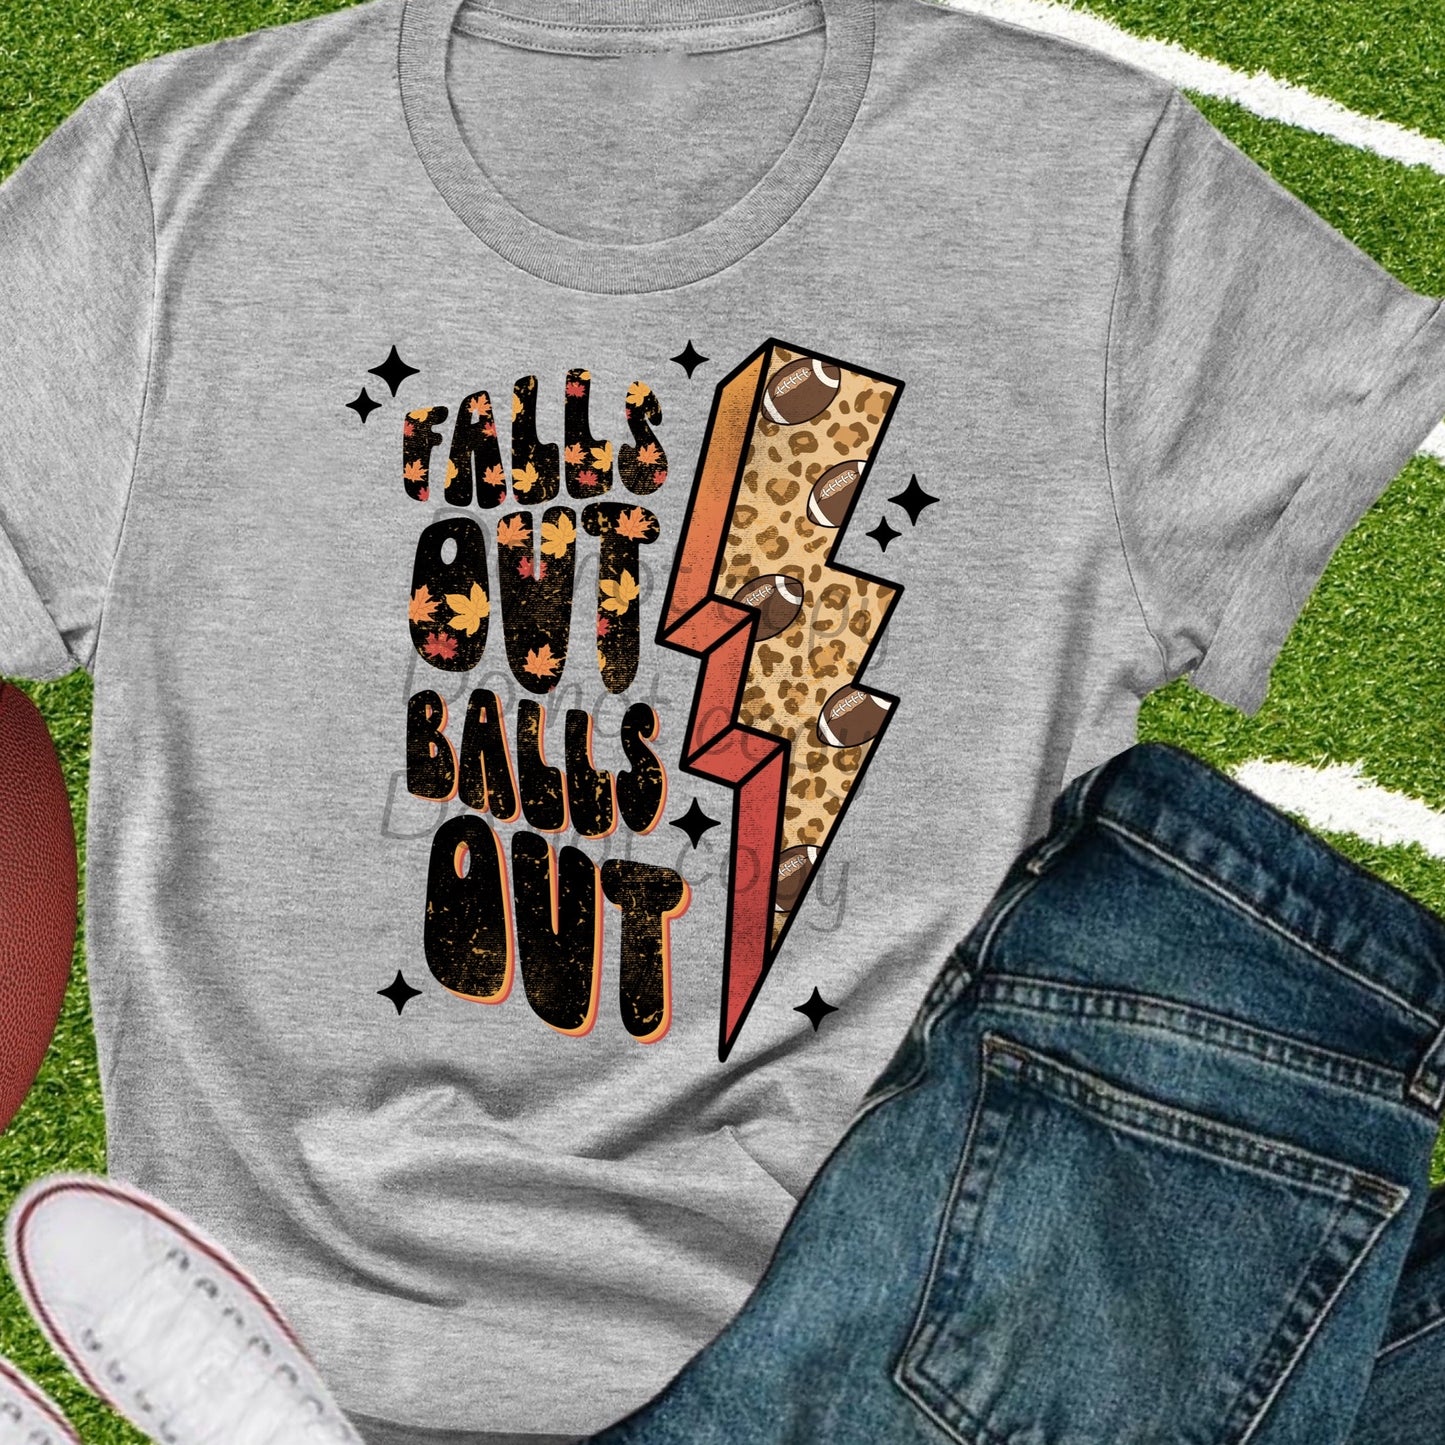 Falls out balls out-DTF